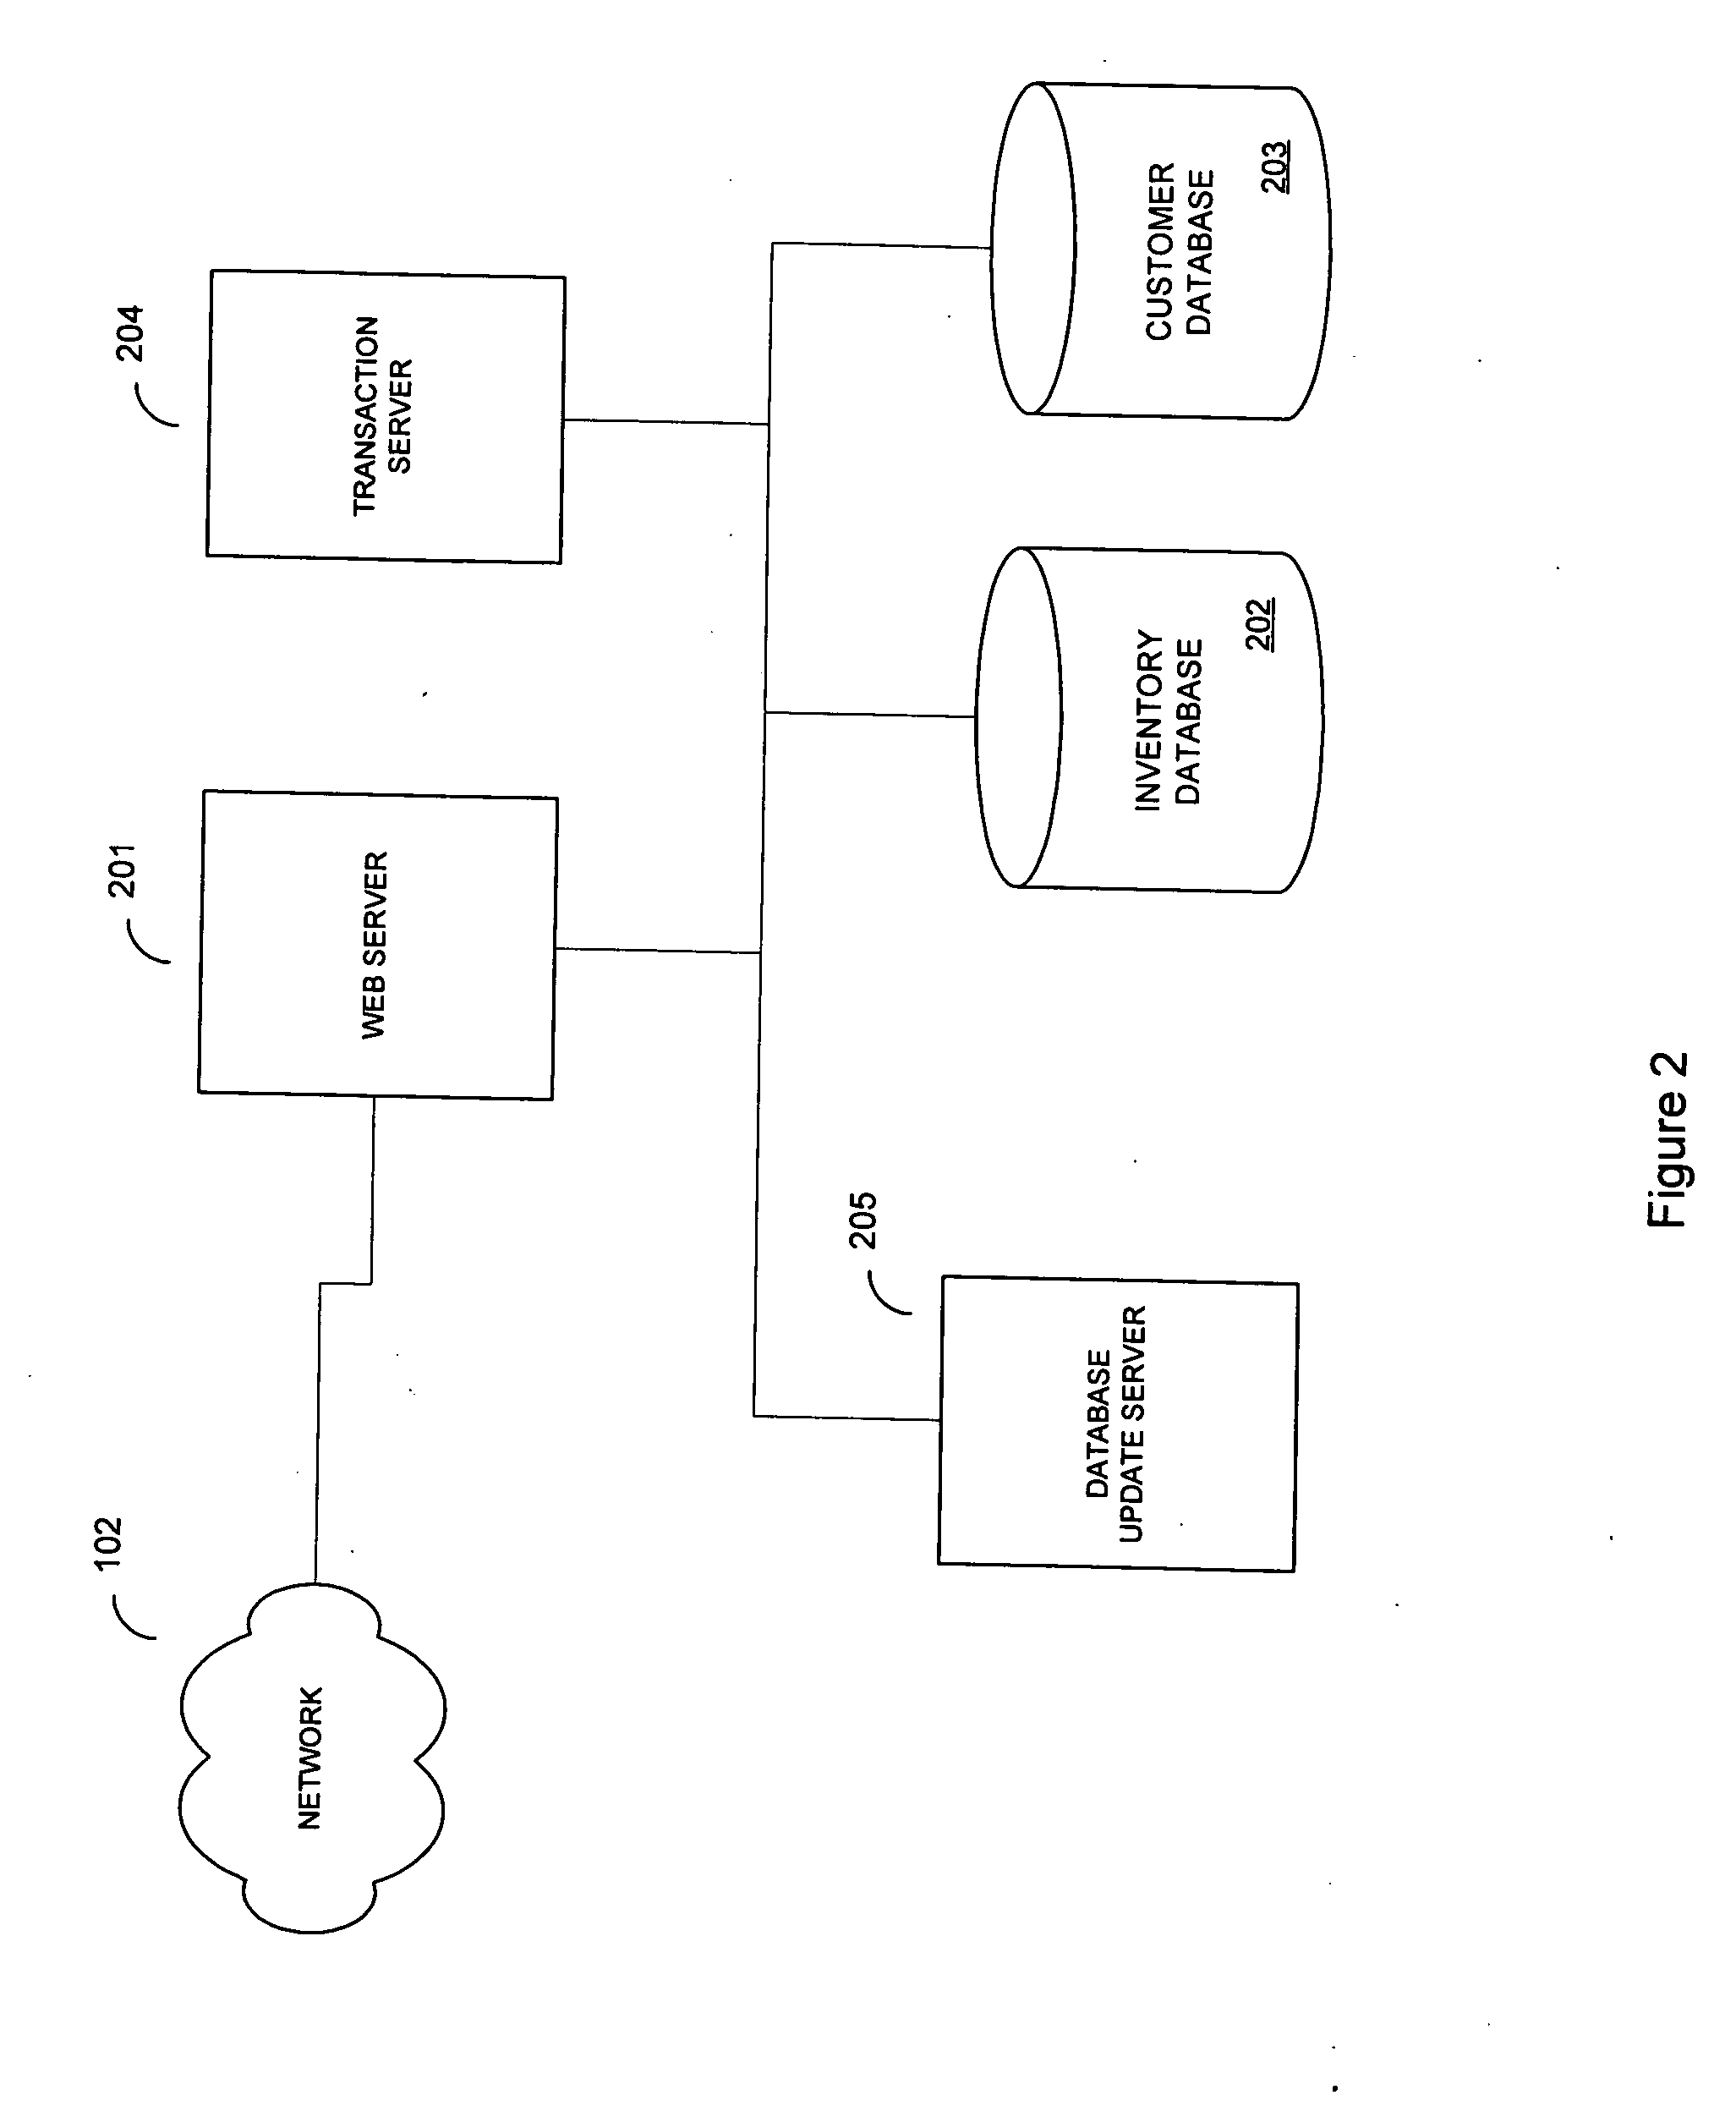 Method and system of managing services in a business center